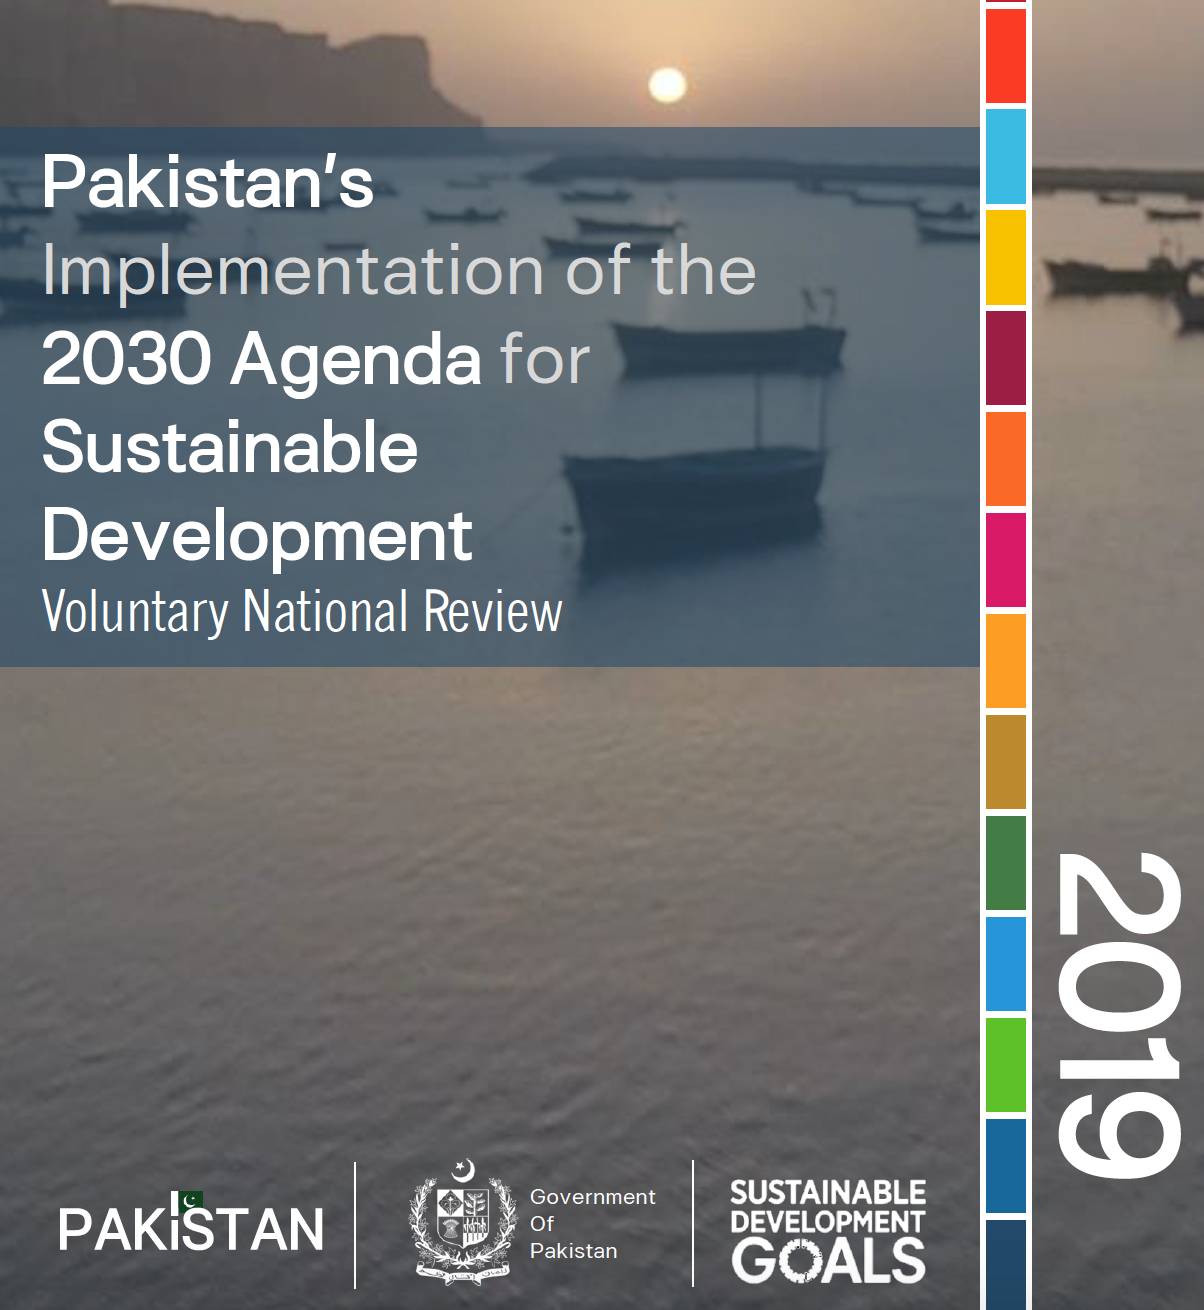 Pakistan’s Implementation of the 2030 Agenda for Sustainable Development